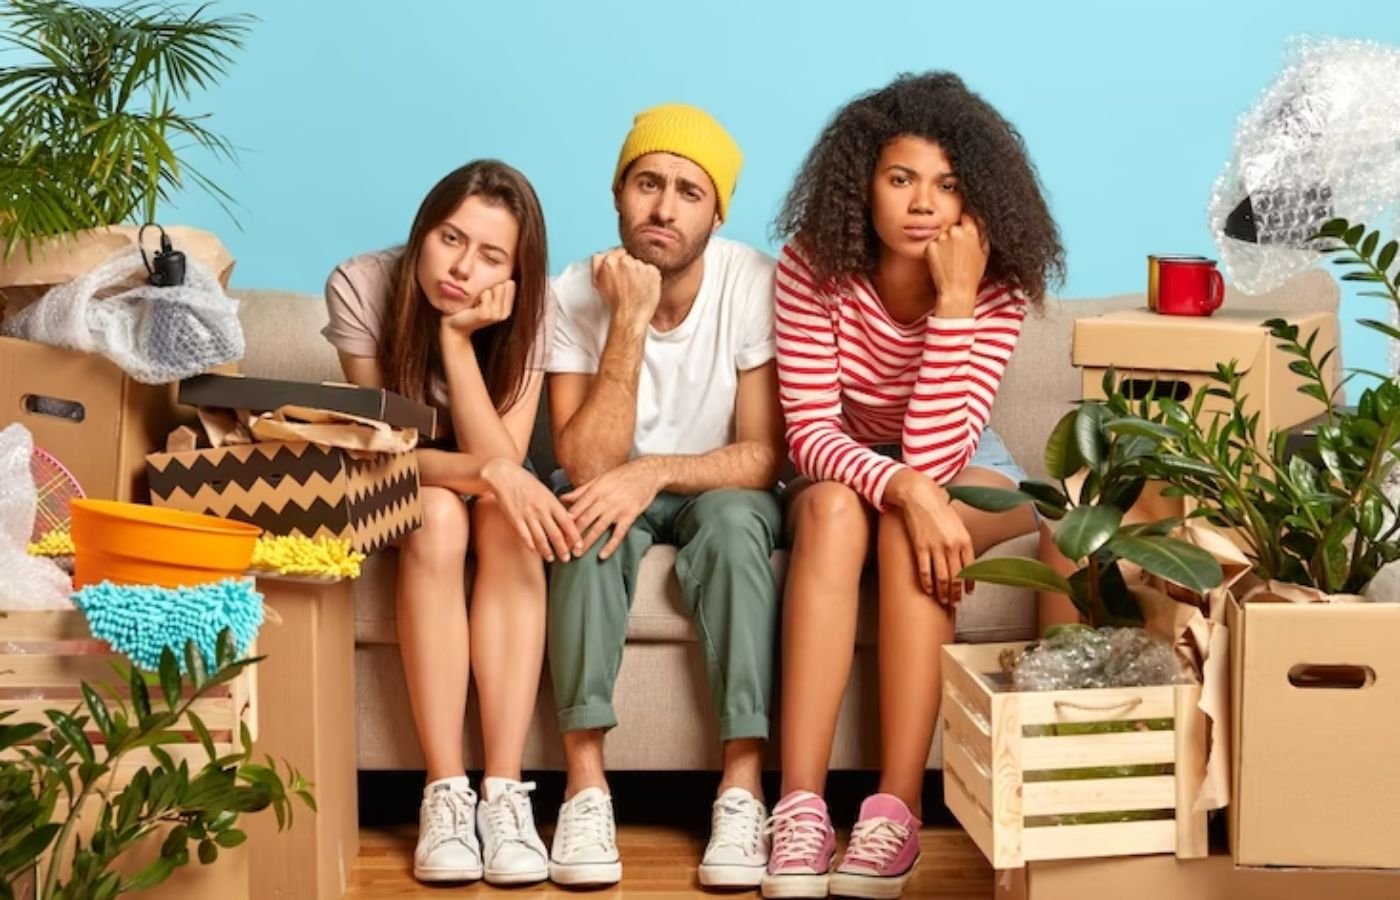 5 Reasons Why Millennials Are Choosing To Rent Instead Of Buy Homes